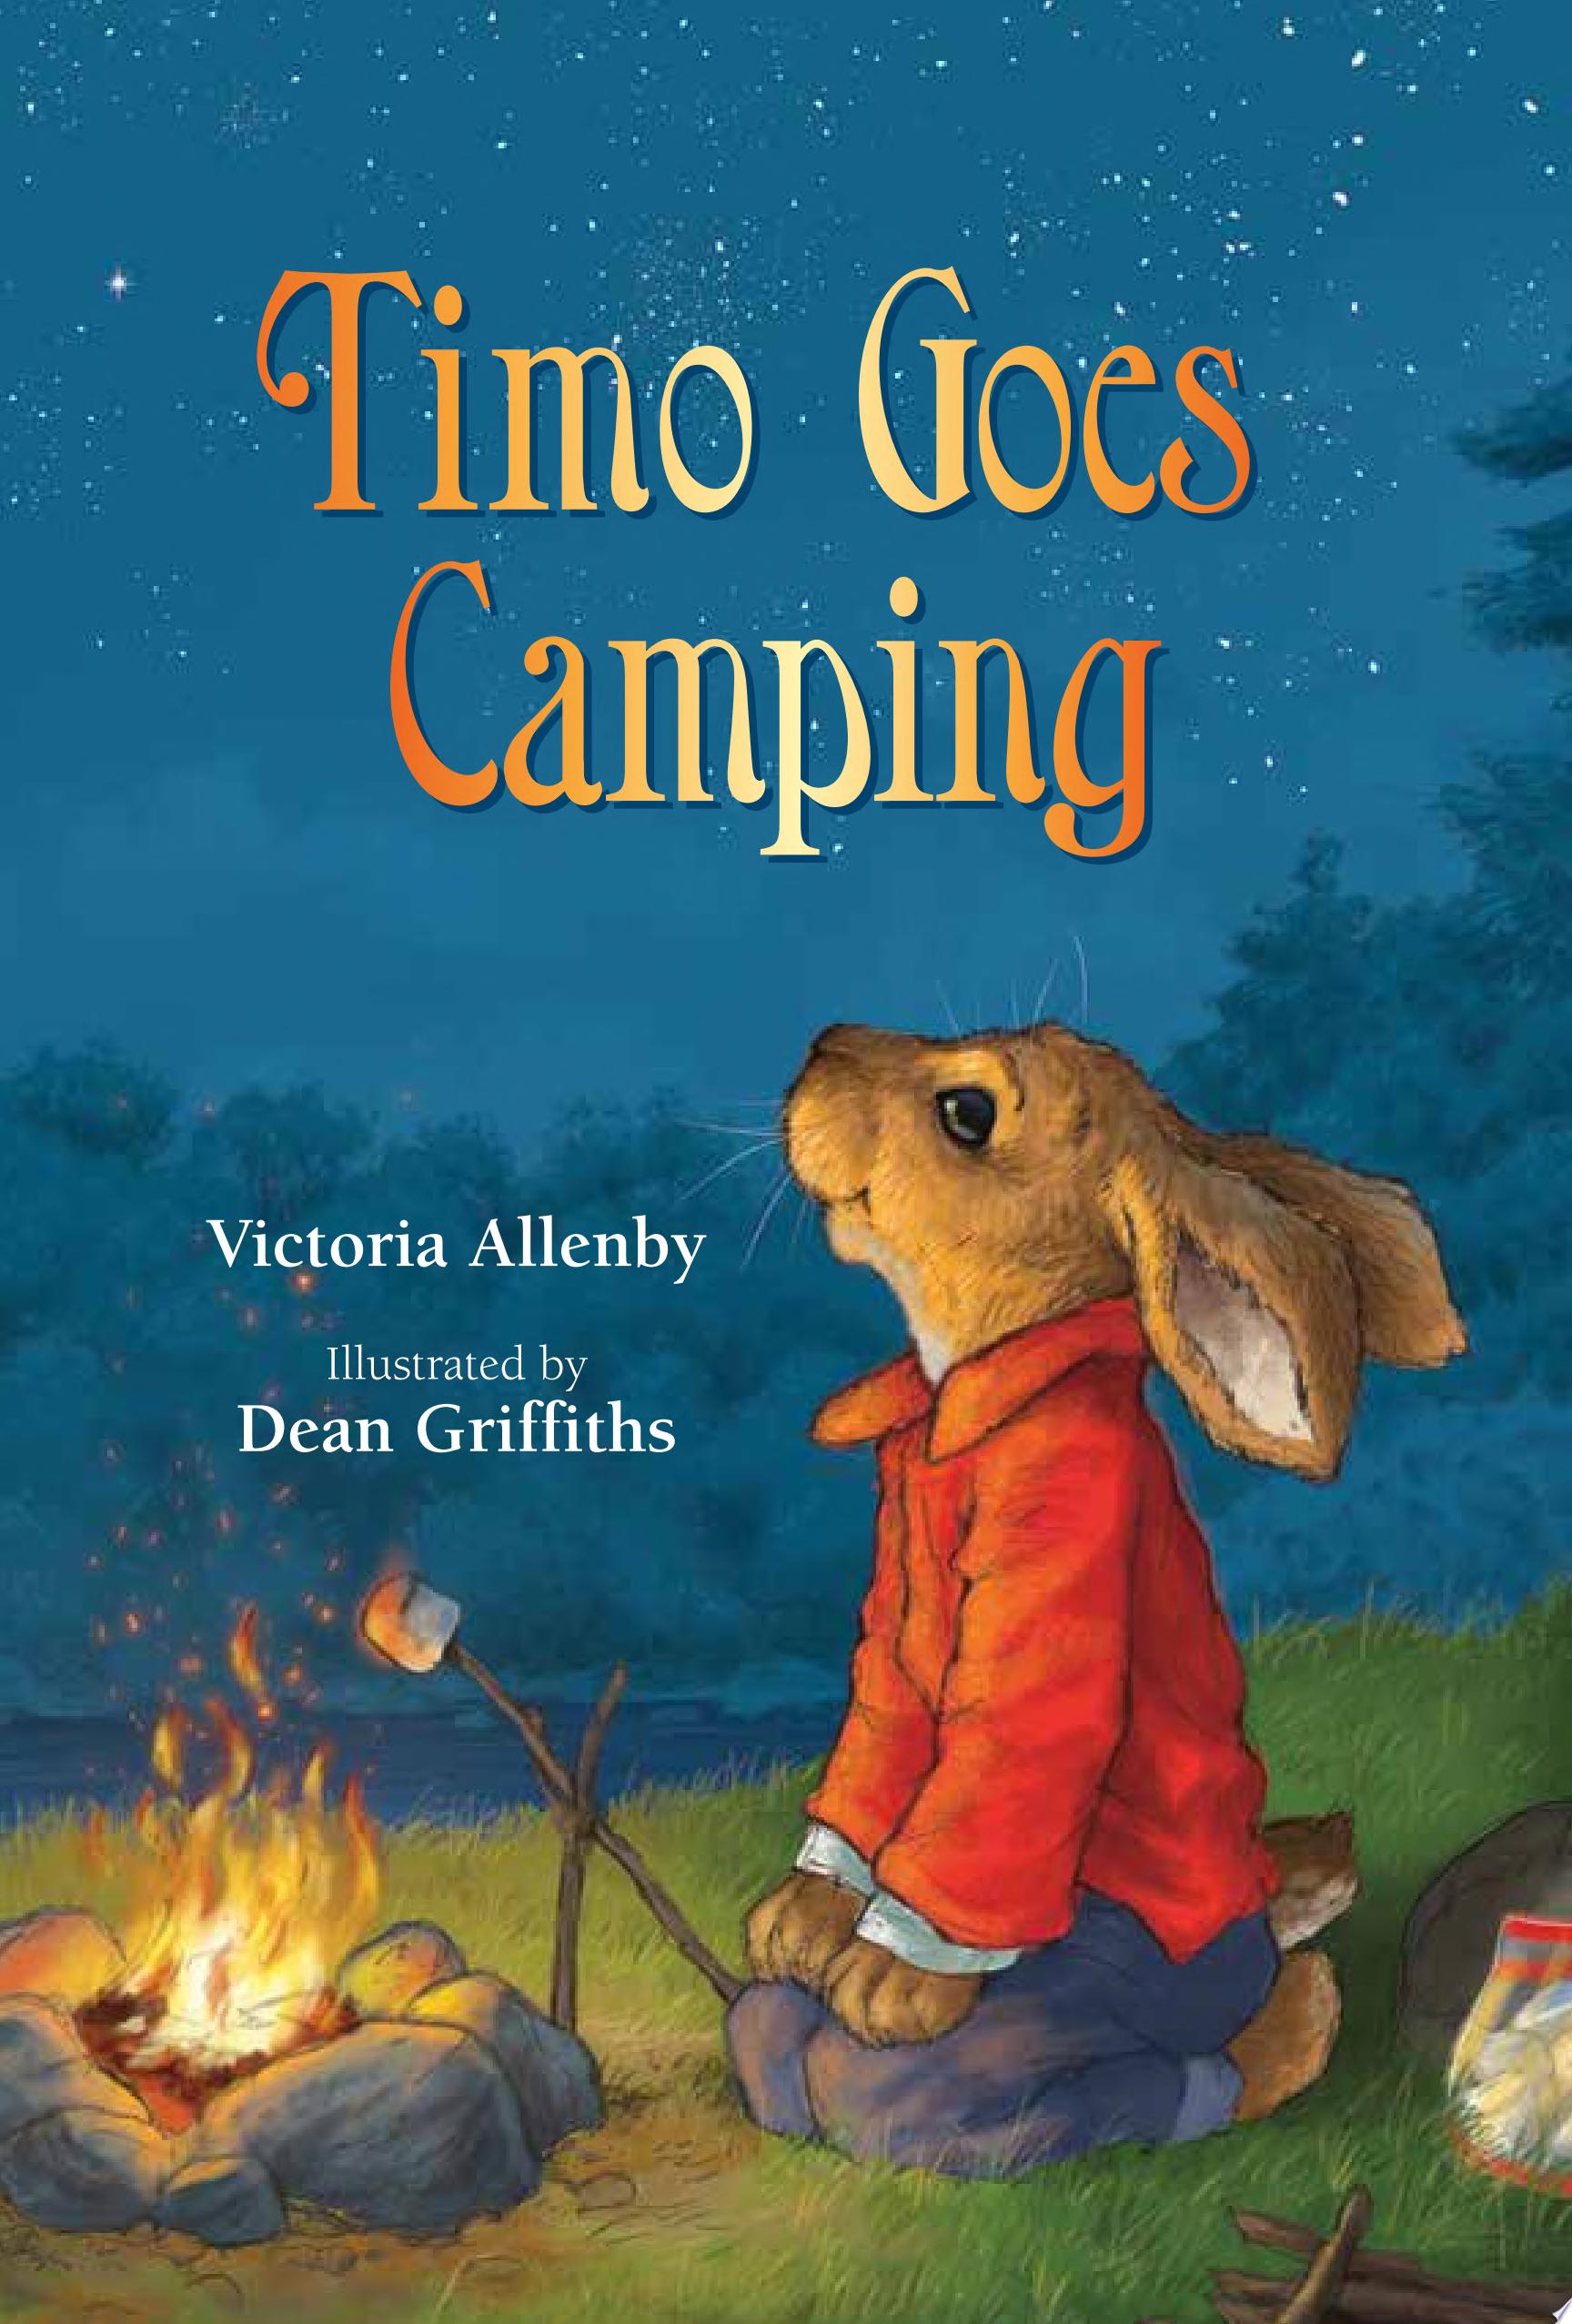 Image for "Timo Goes Camping"